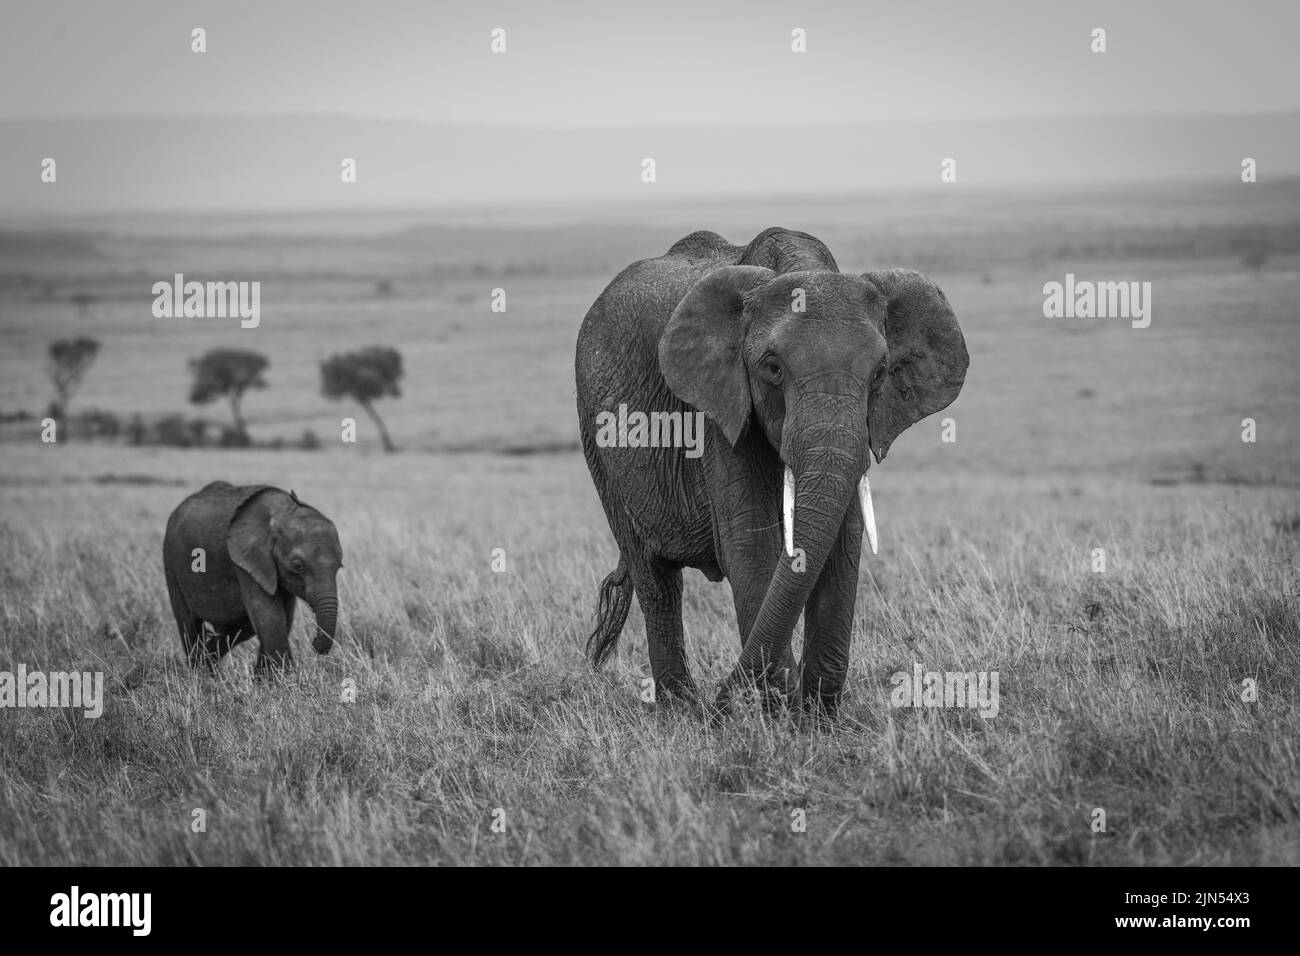 A grayscale shot of mother and baby elephant walking on grass field at daytime in National Park Stock Photo